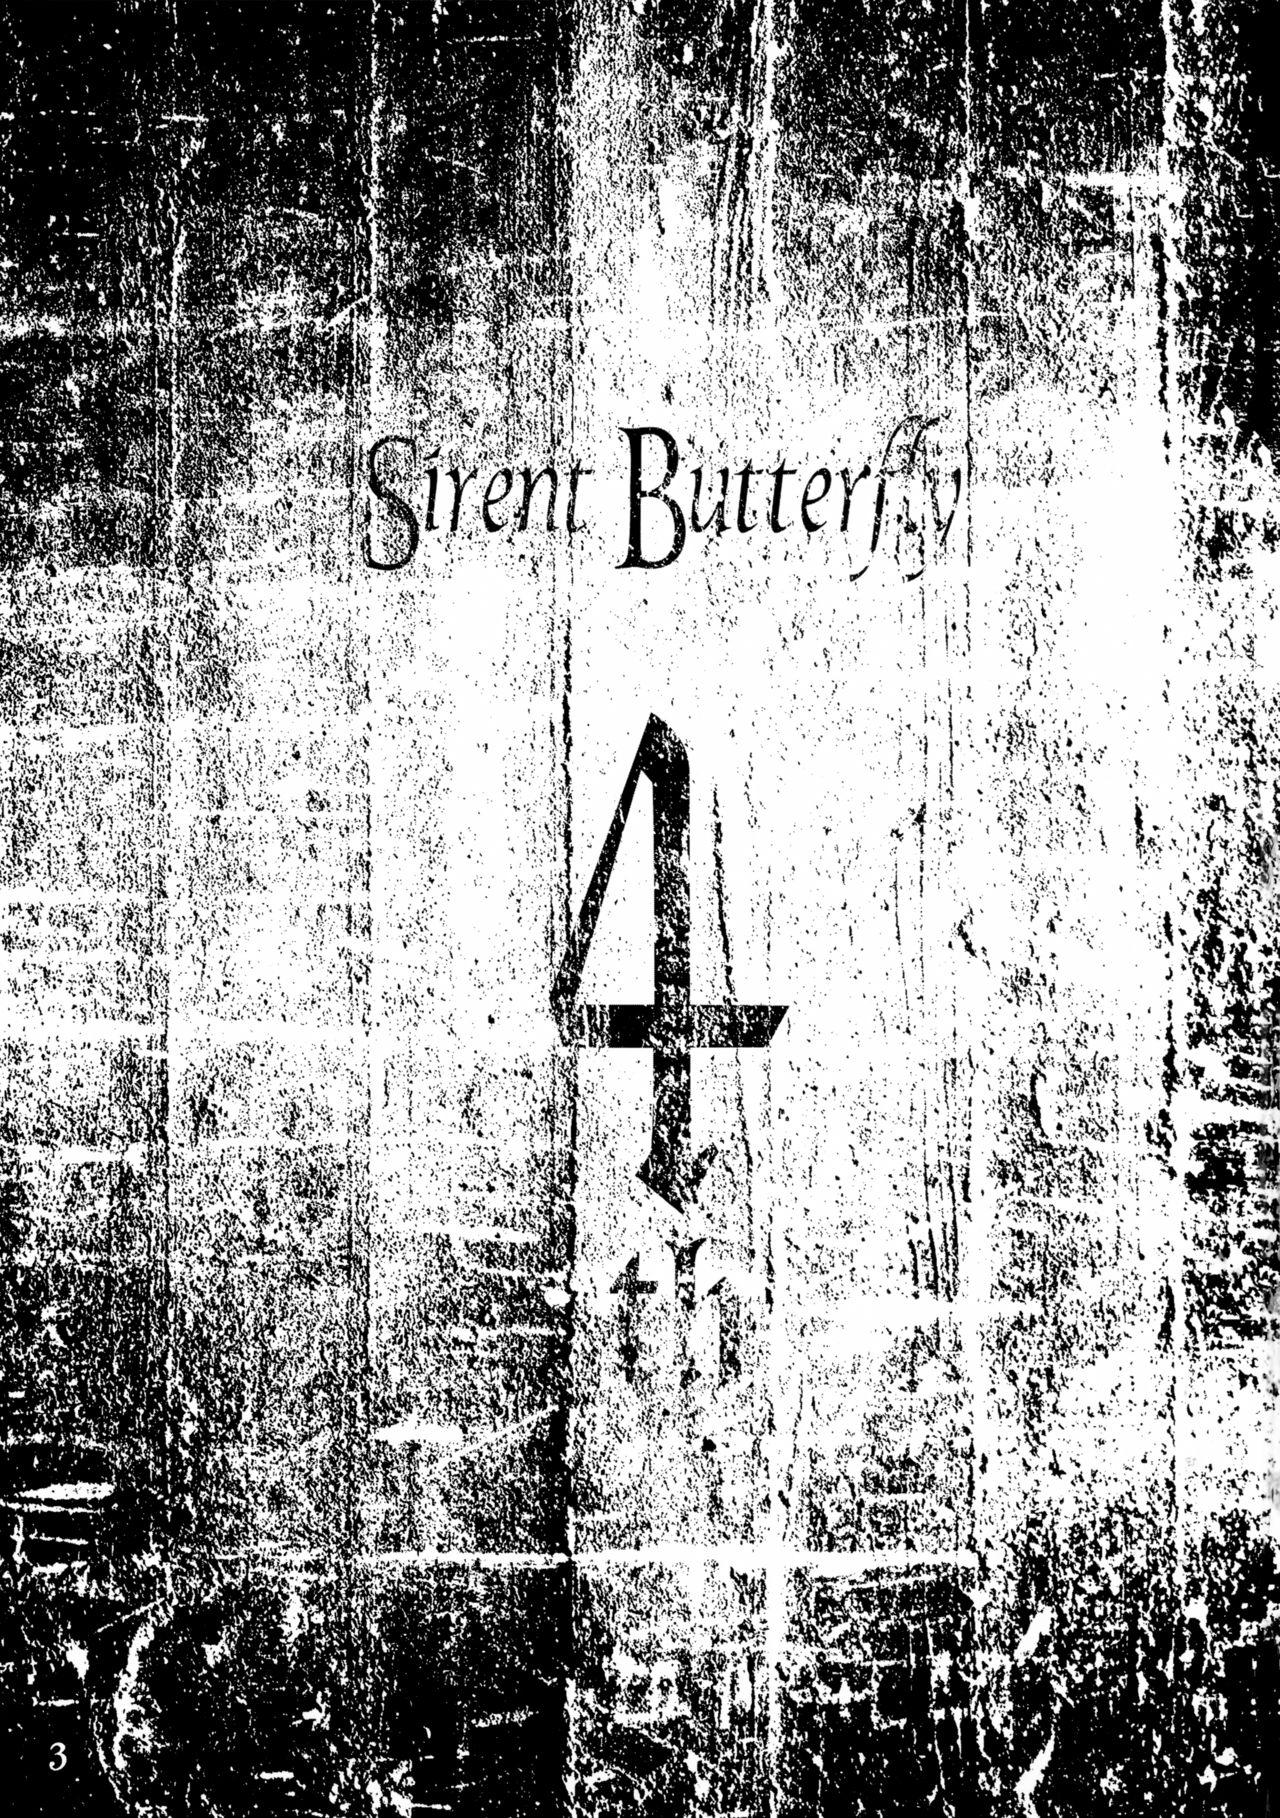 Silent Butterfly 4th 2